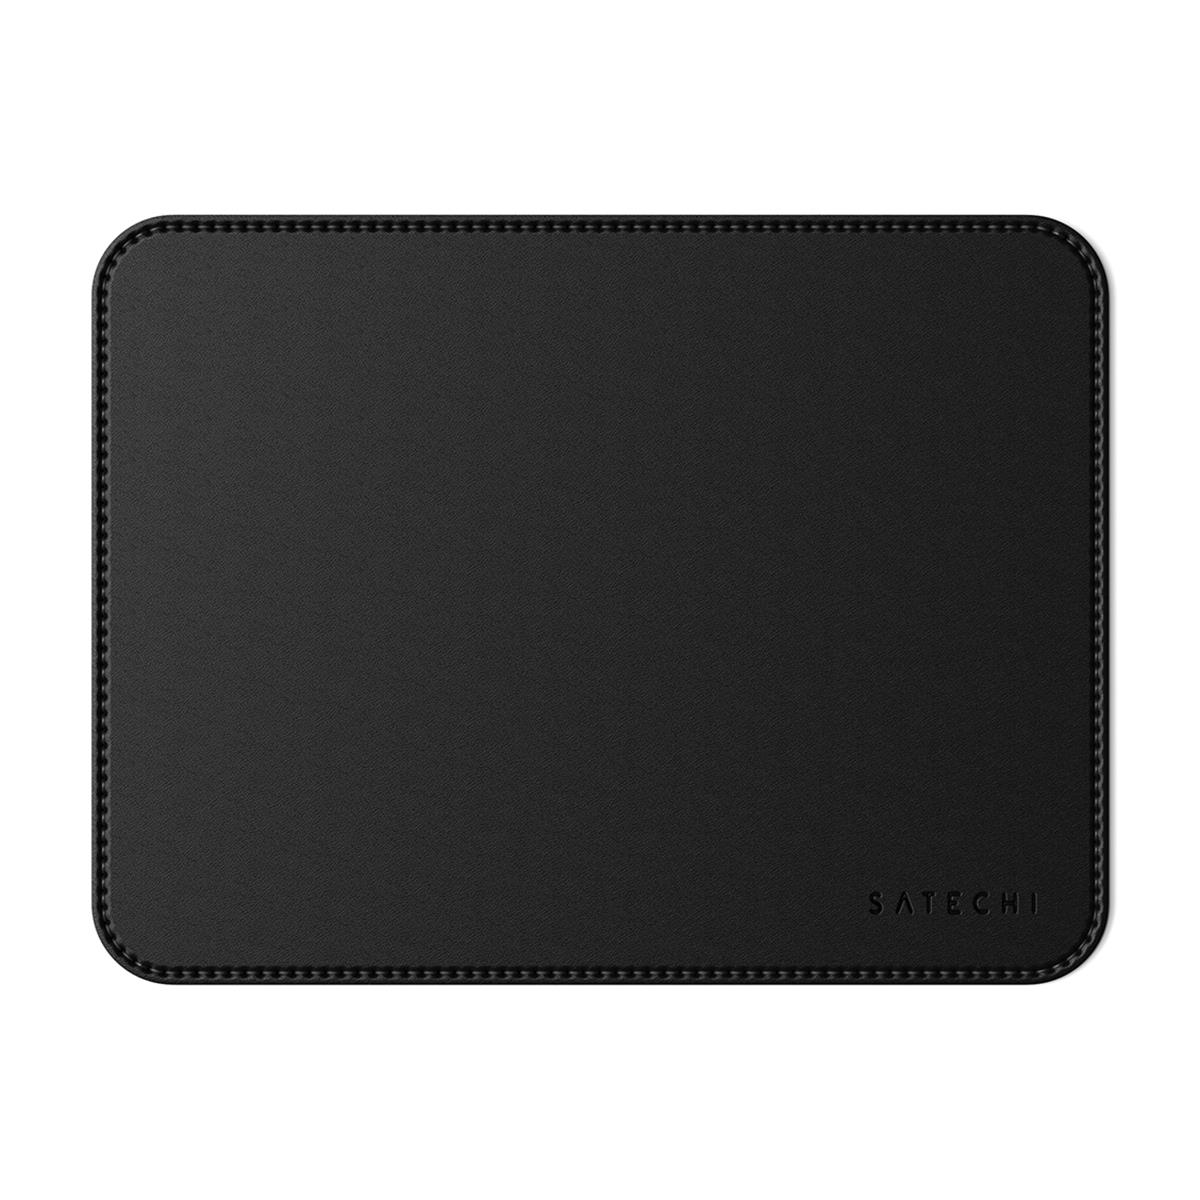 Image of Satechi Eco-Leather Mouse Pad